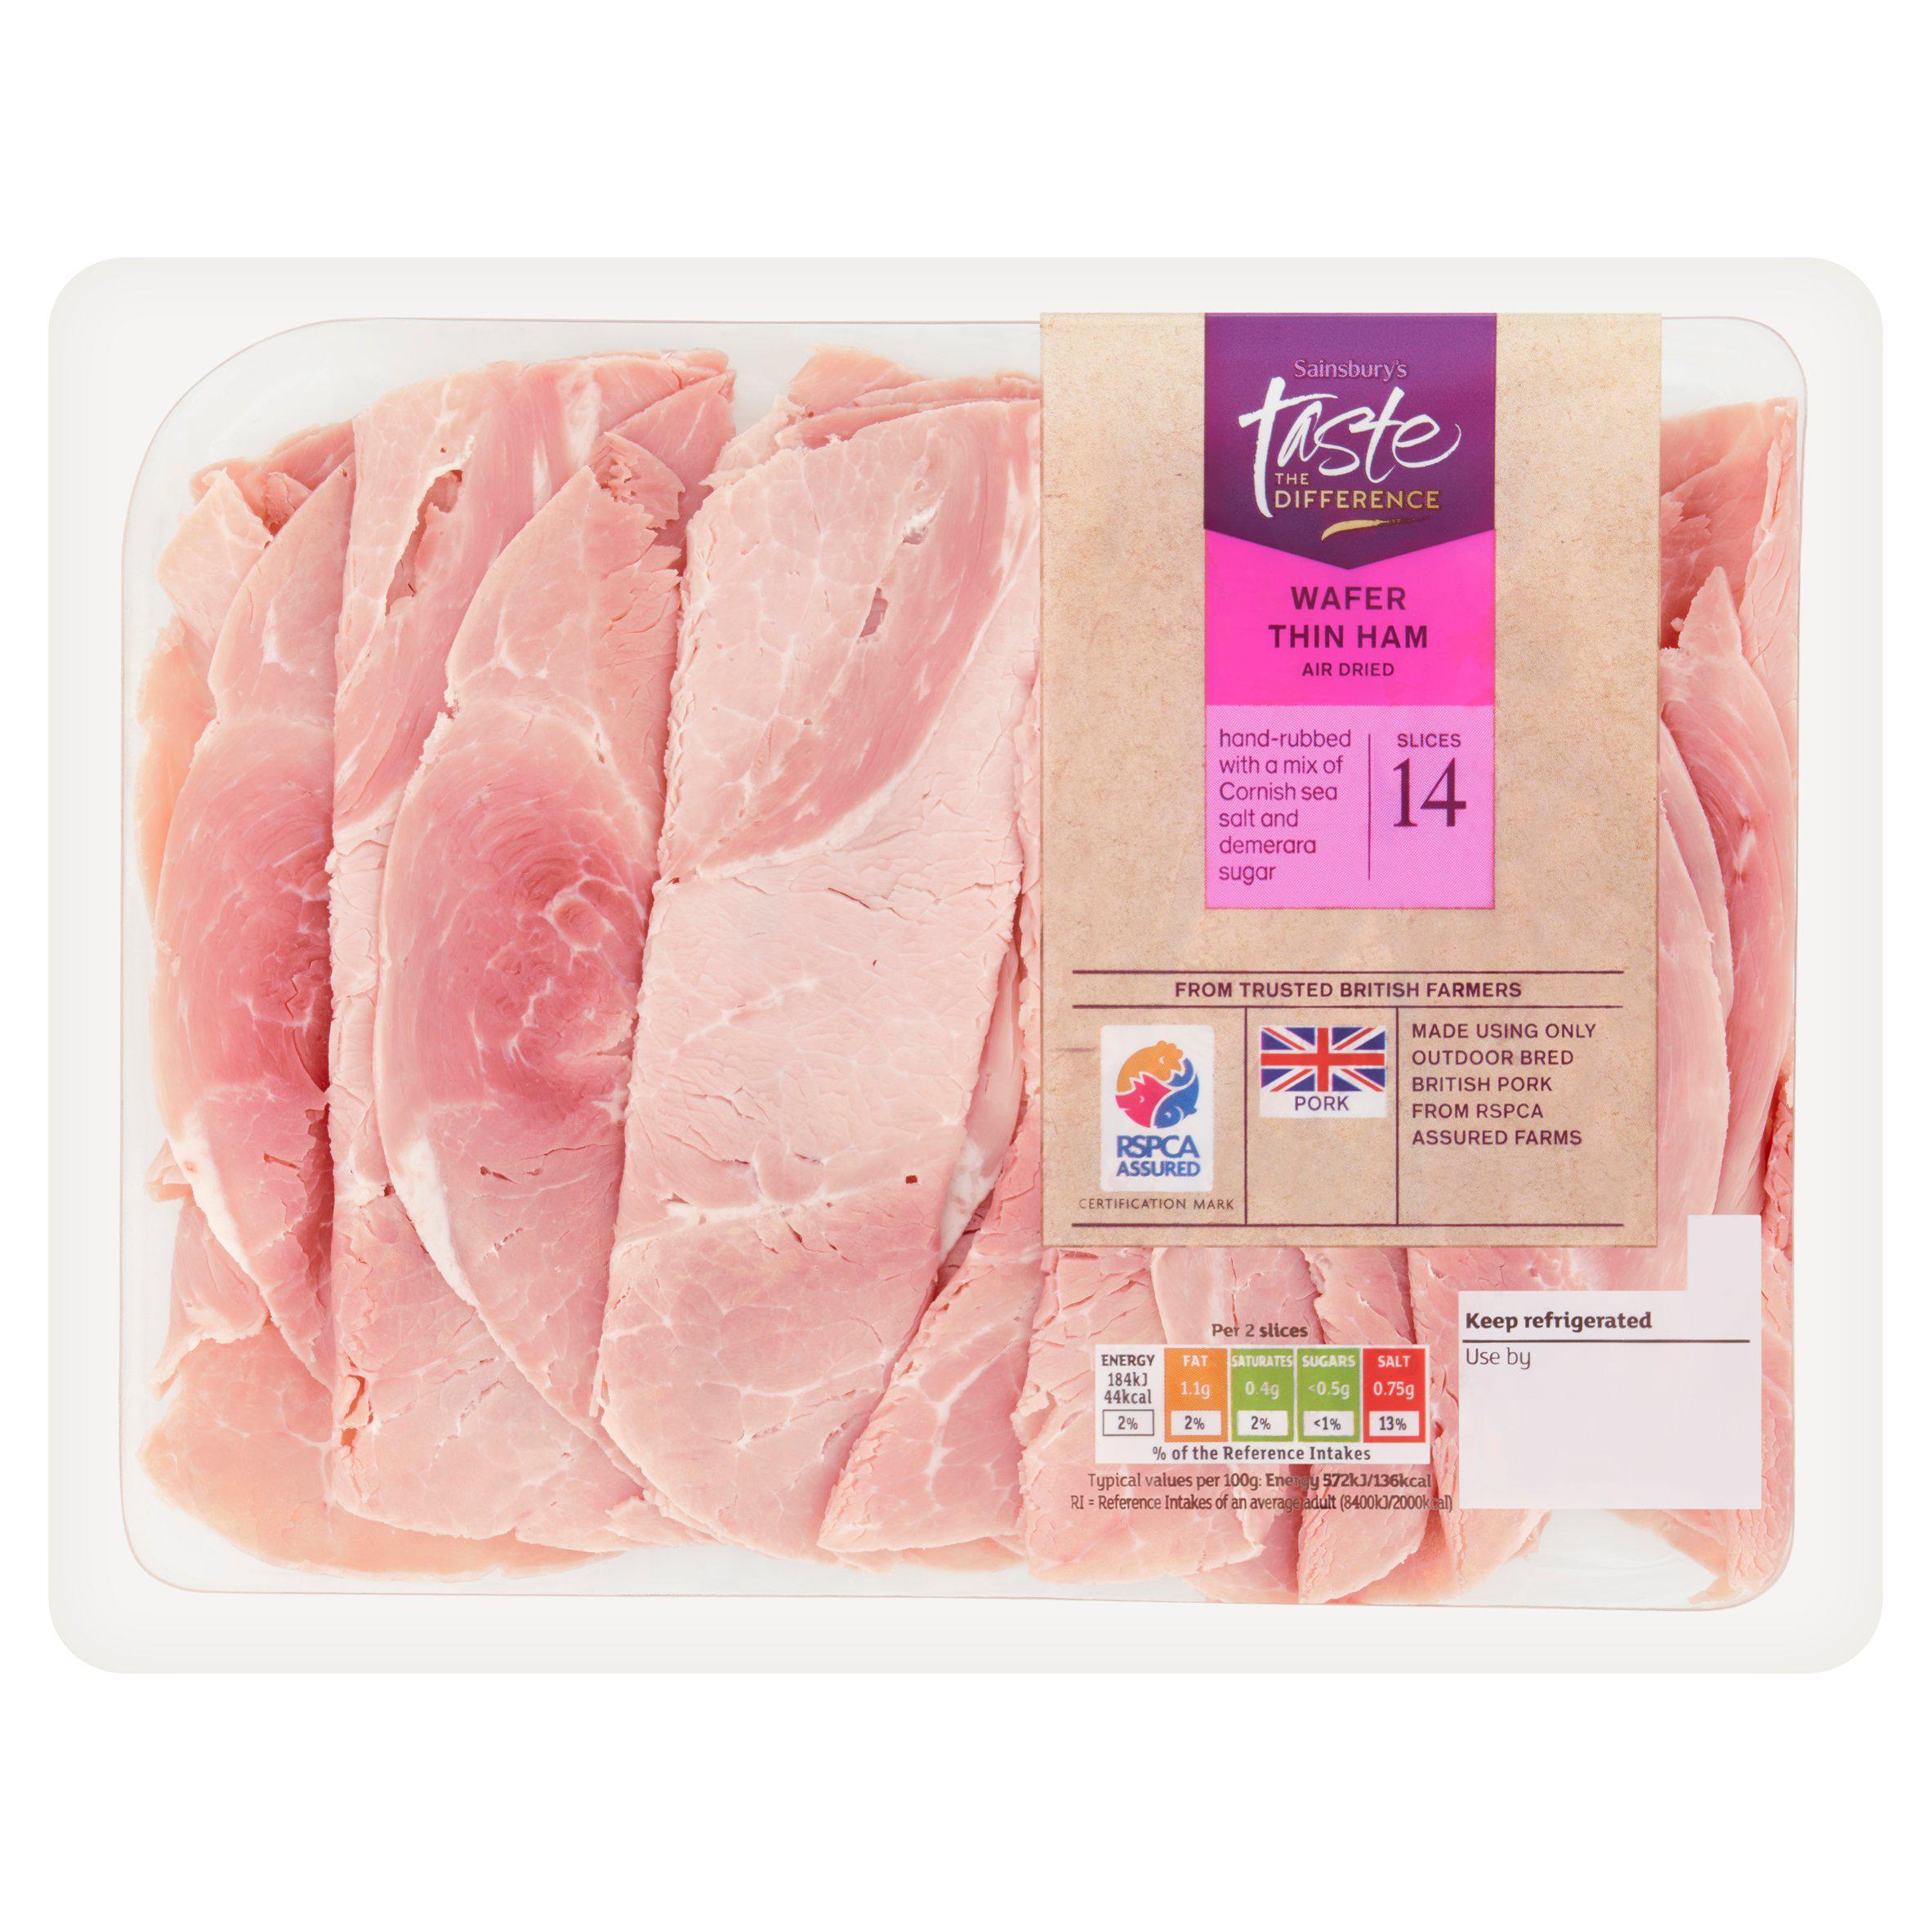 Sainsbury’s Air Dried Finely Sliced Ham, Taste the Difference 225g